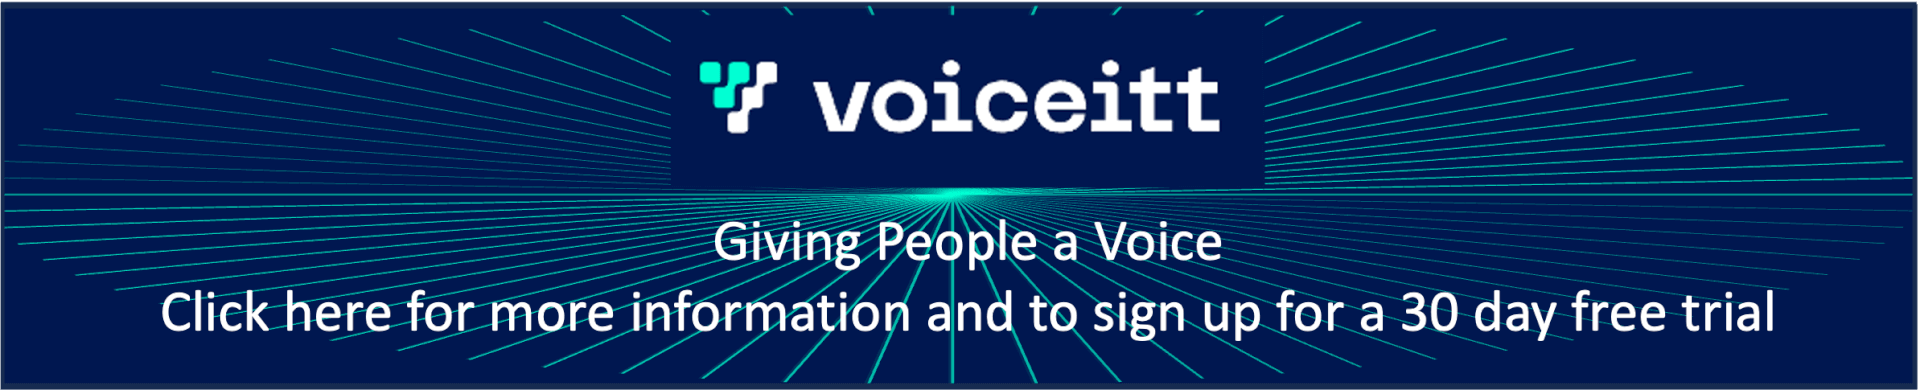 Voiceitt Banner. On the left is the Voiceitt Logo consisting of their V built out of squares with the left hand squares in a teal colour and the right in White. Next to the V iss Voiceitt in white text. To the side of the Voiceitt logo is the Text: 